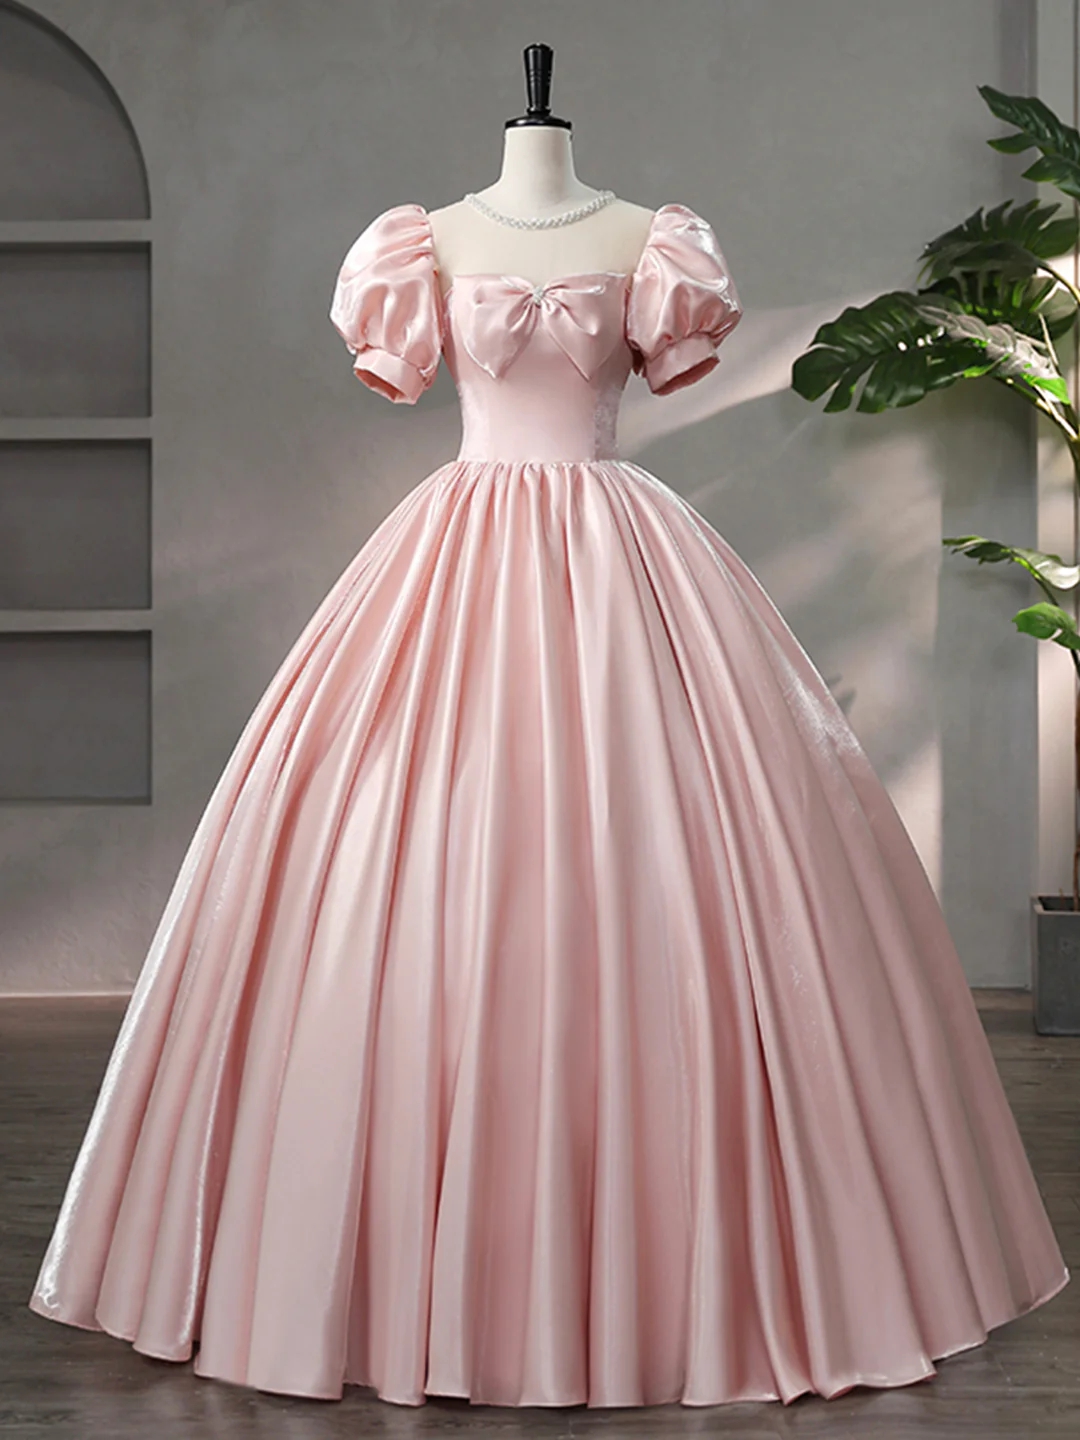 Enchanting Blush Pink Ball Gown With Embellished Bodice